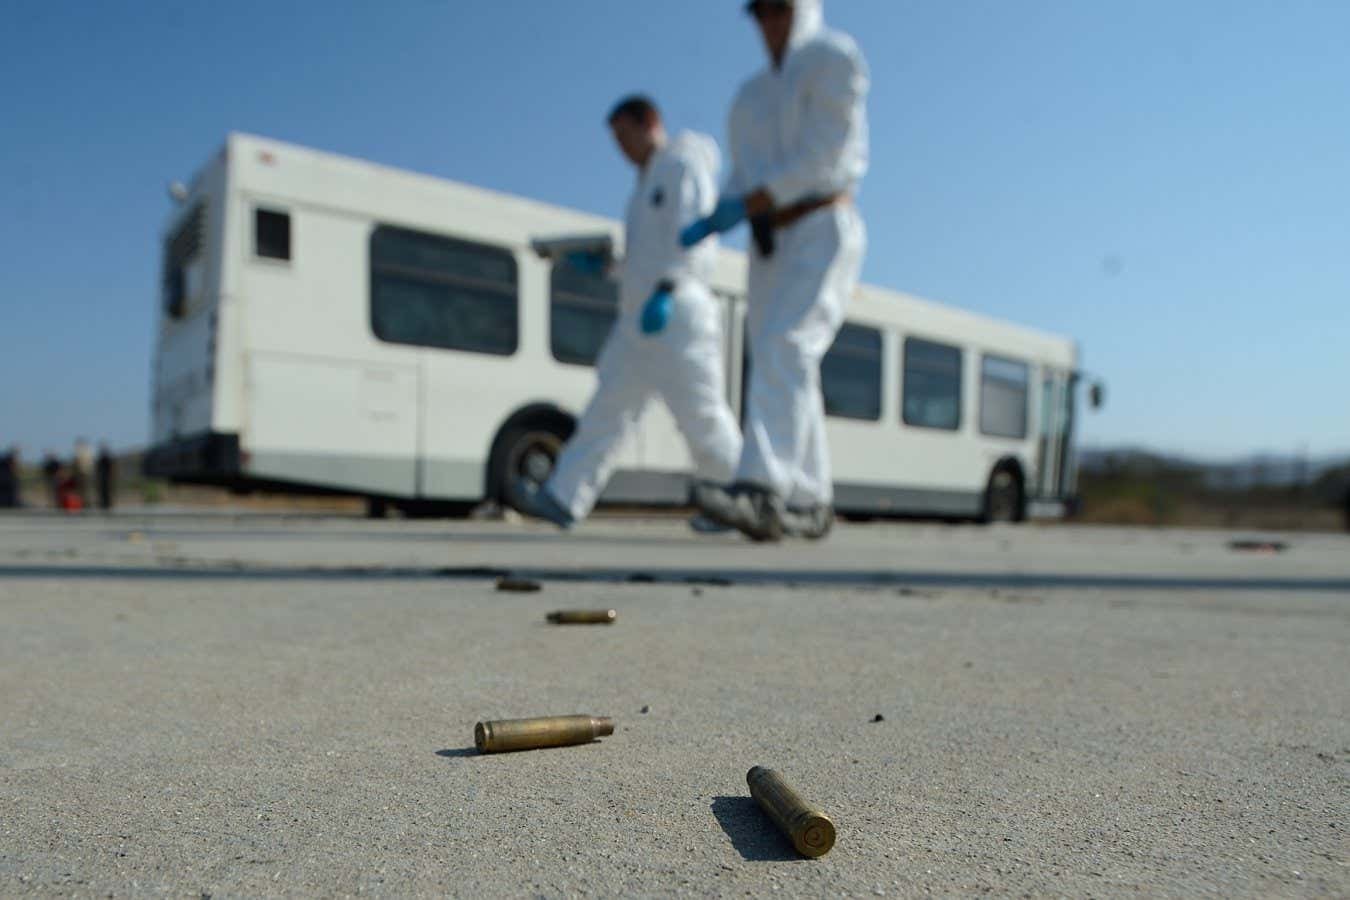 Missing bullets can be identified by ricochet residue at crime scenes